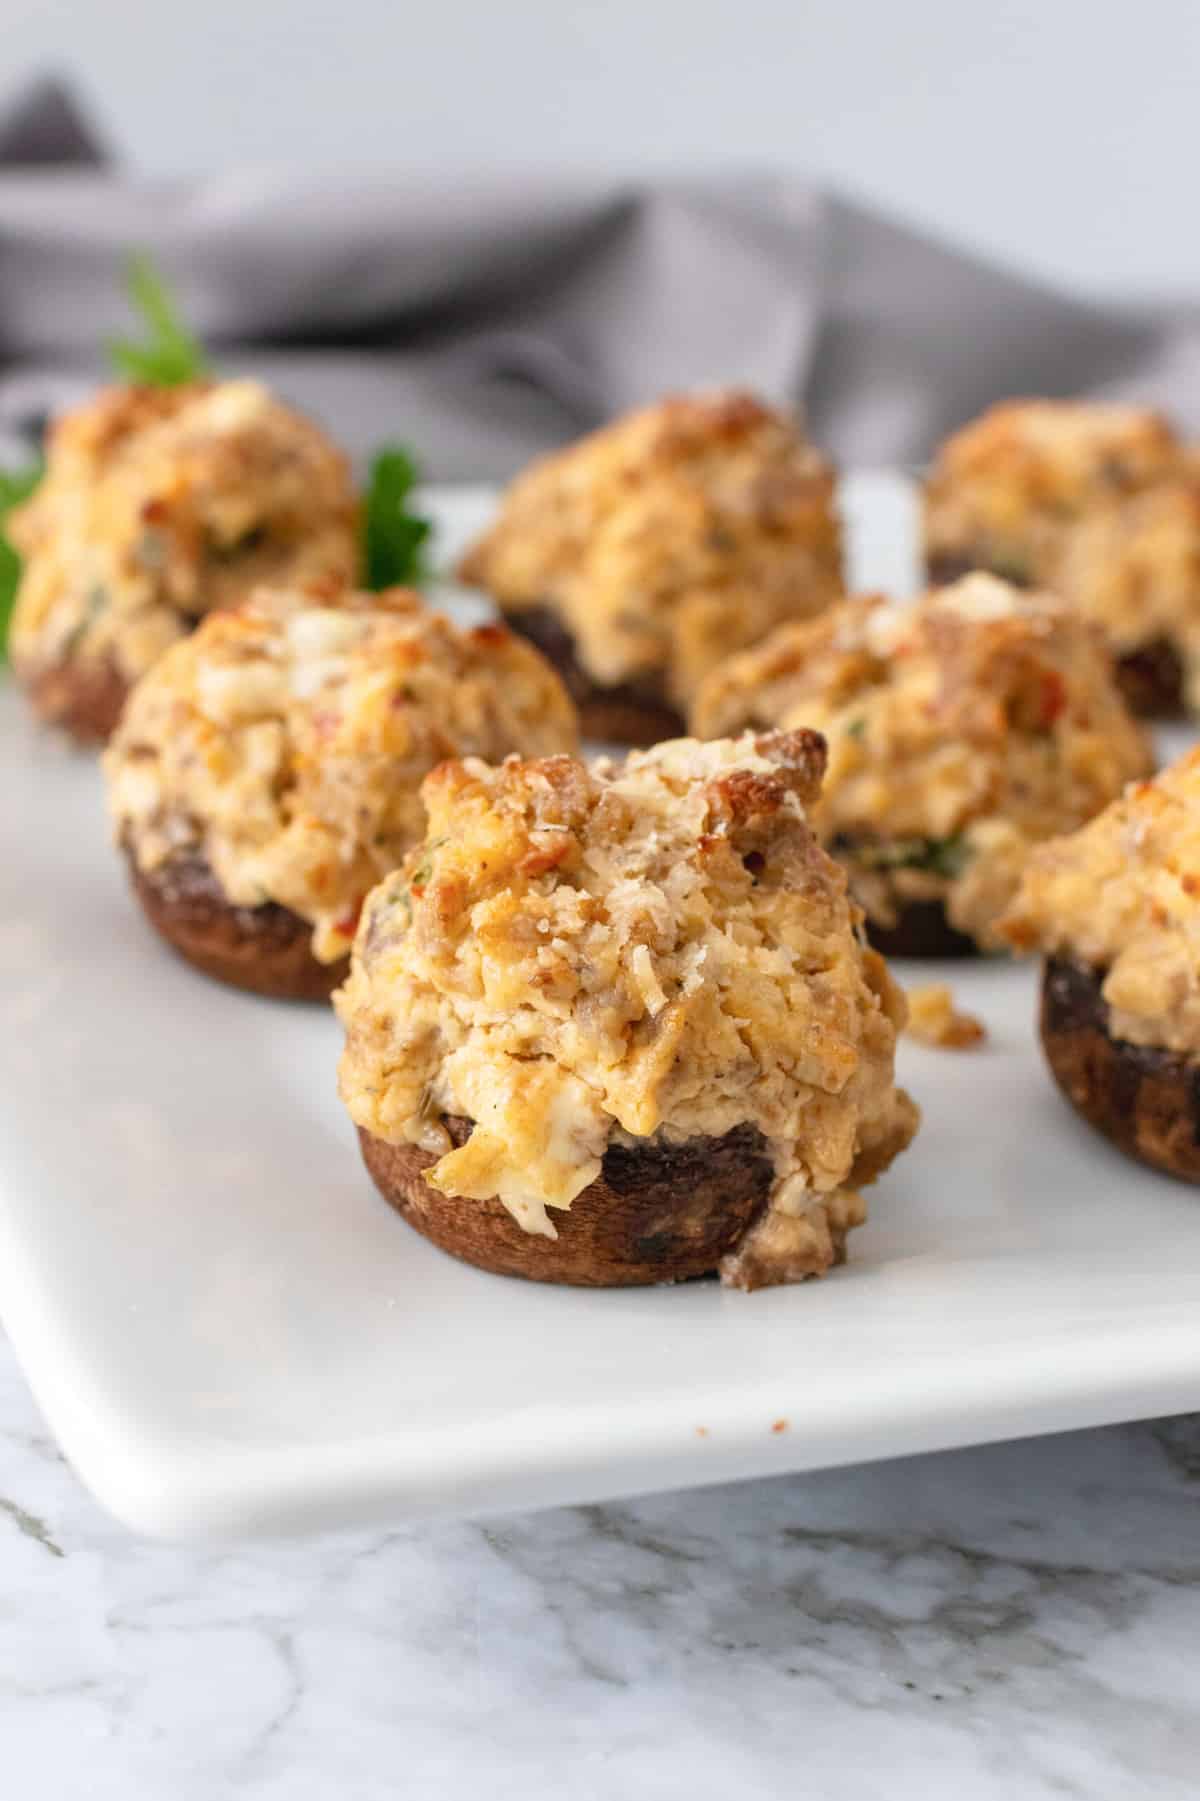 Sausage stuffed mushrooms on a white plate, garnishes with parsley